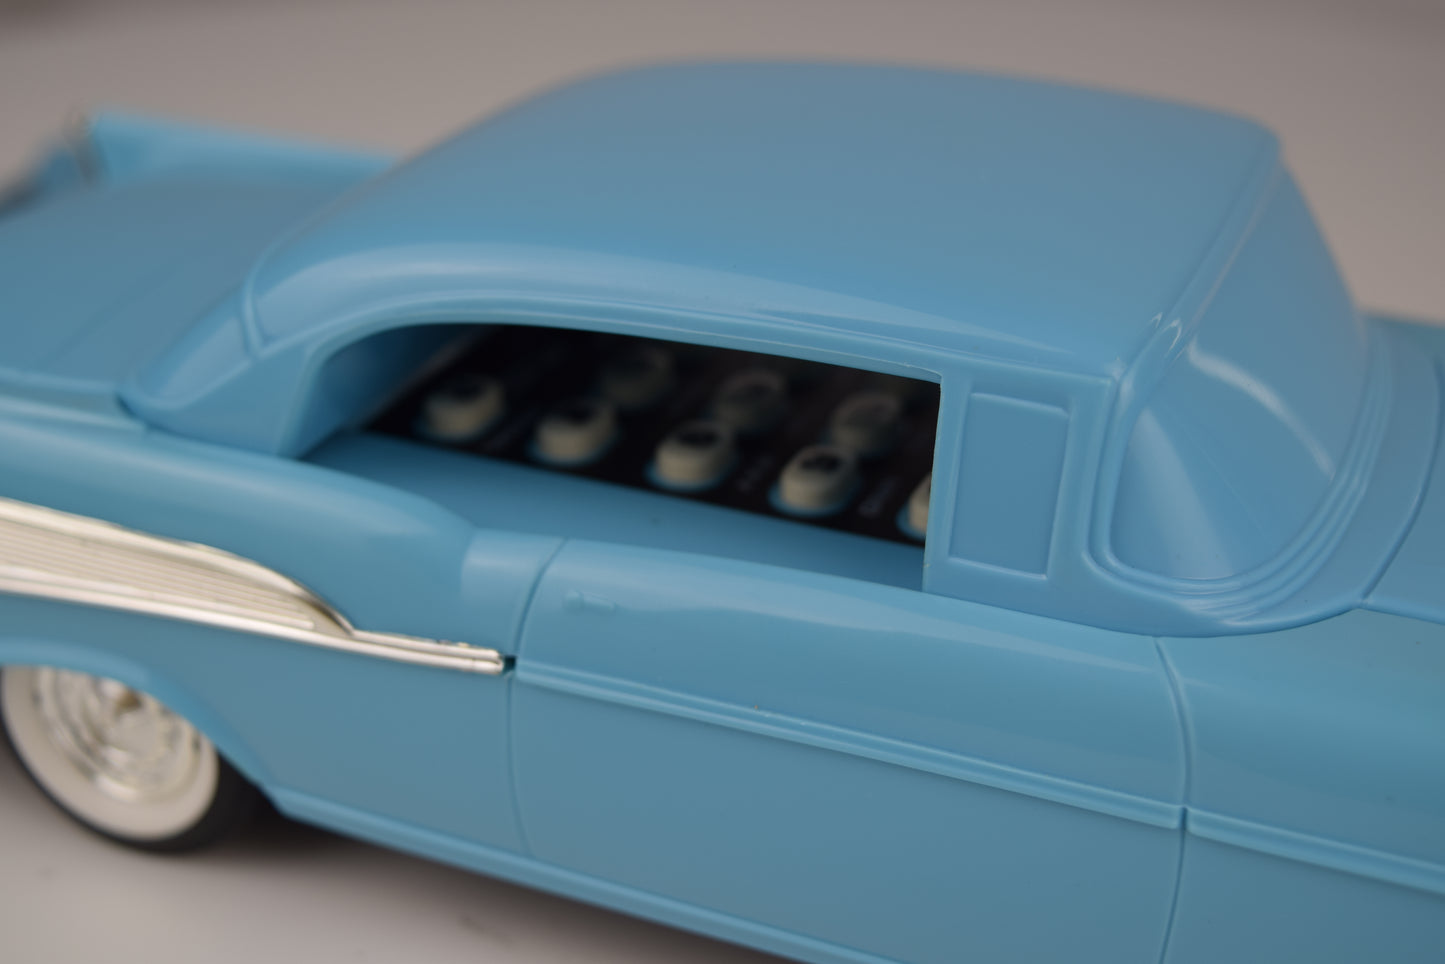 Blue 57 Chevy Novelty Phone